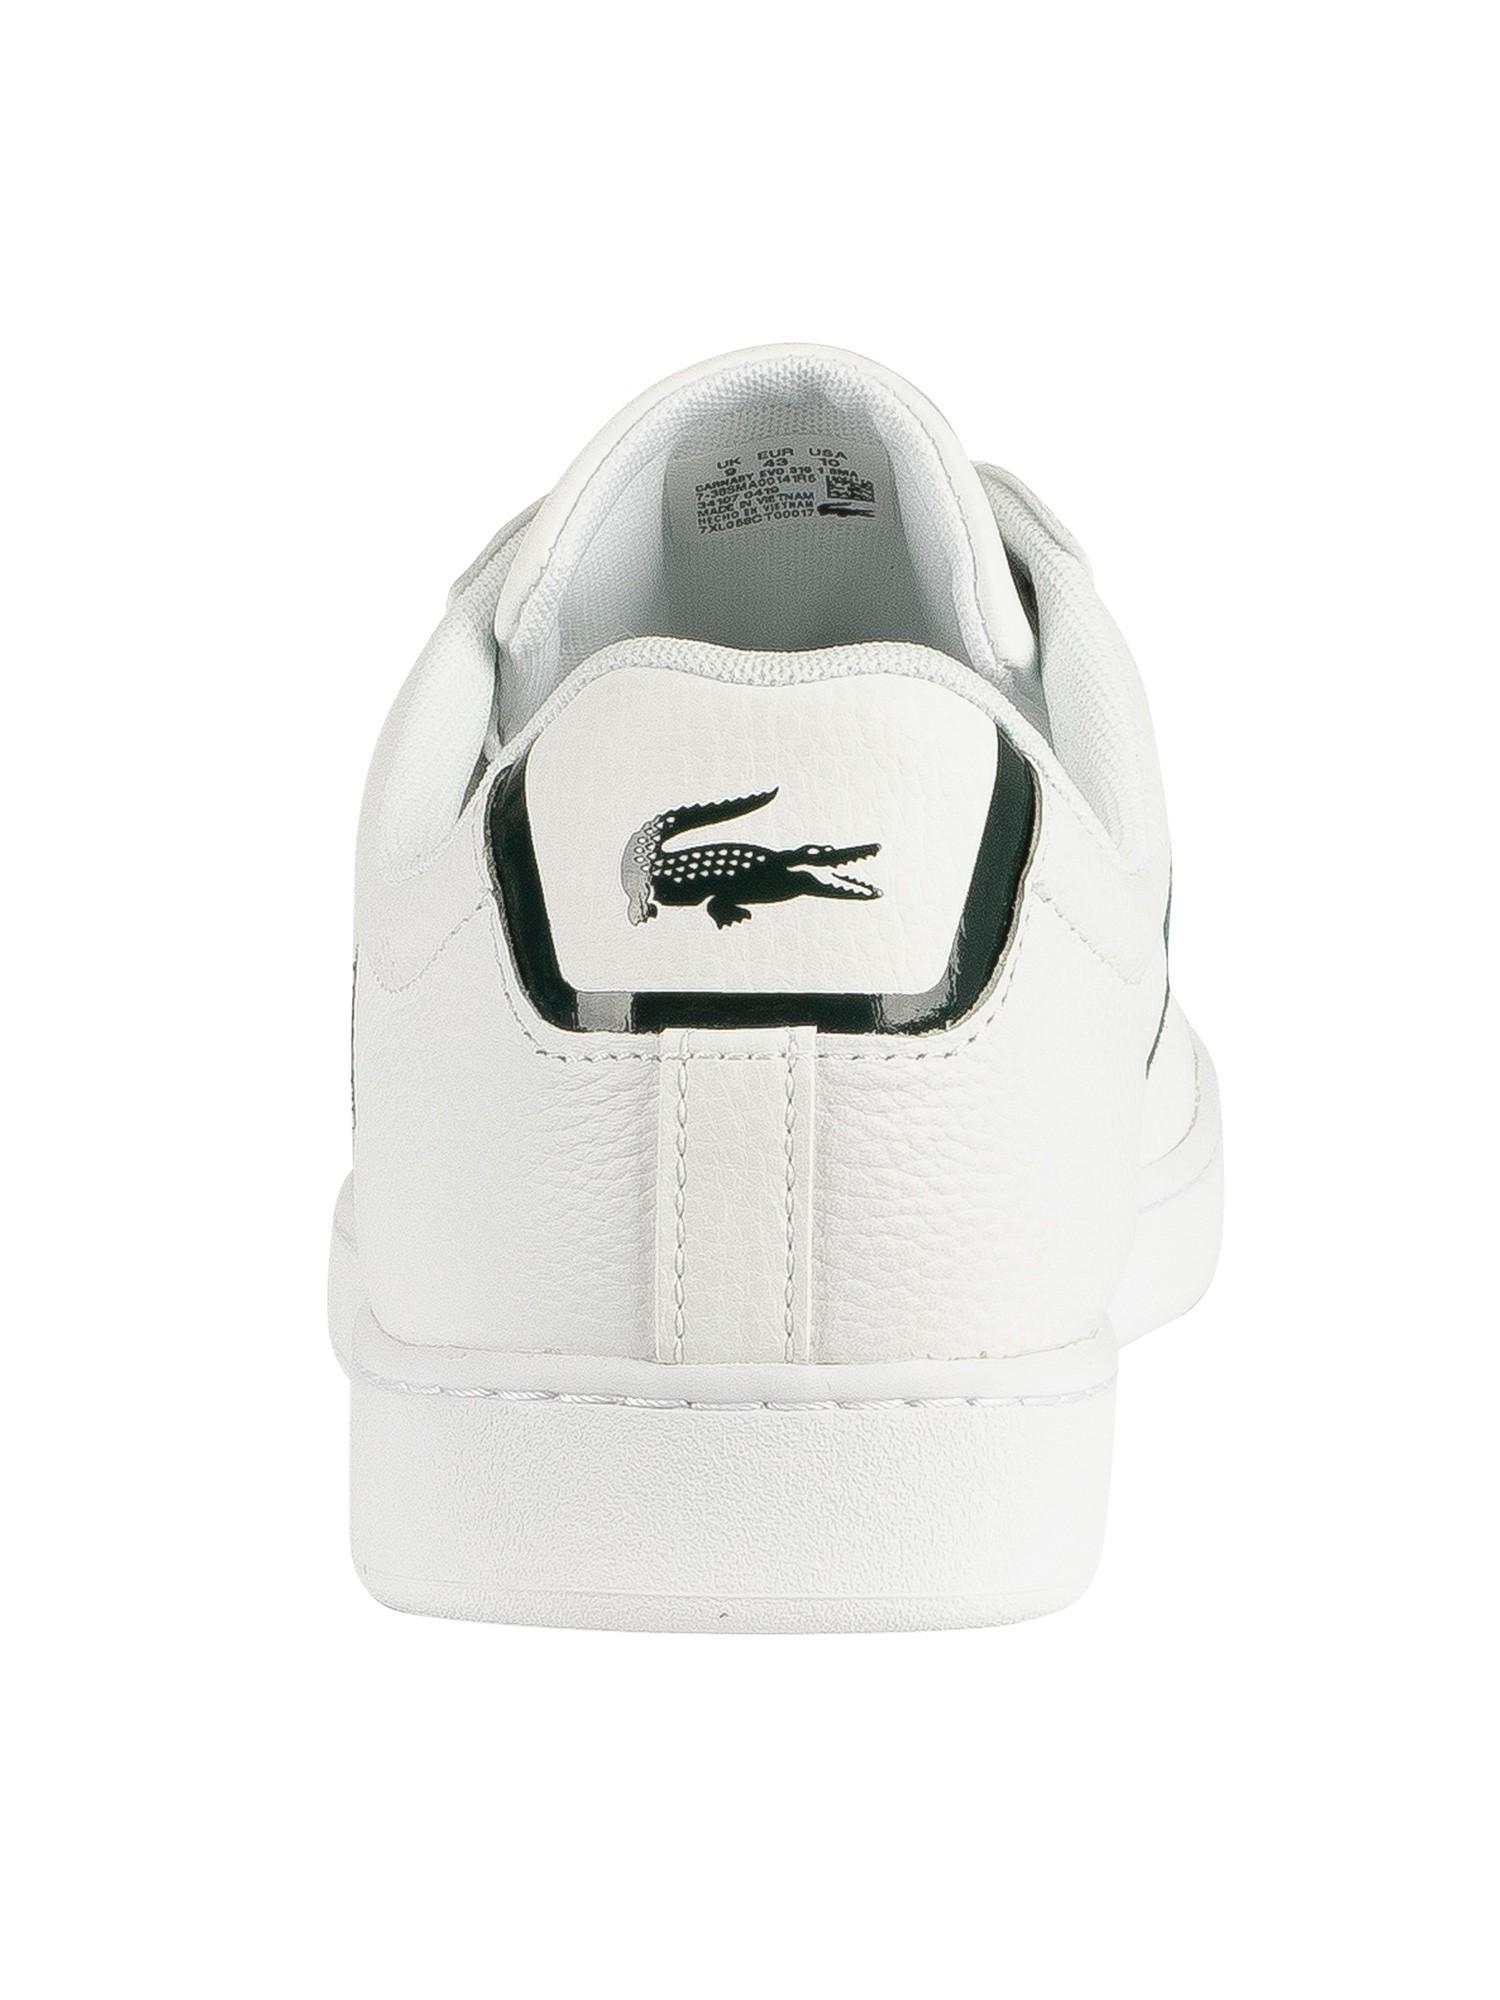 Lacoste Carnaby Evo 319 1 Sma Leather Trainers in White/Dark Green (White)  for Men - Lyst